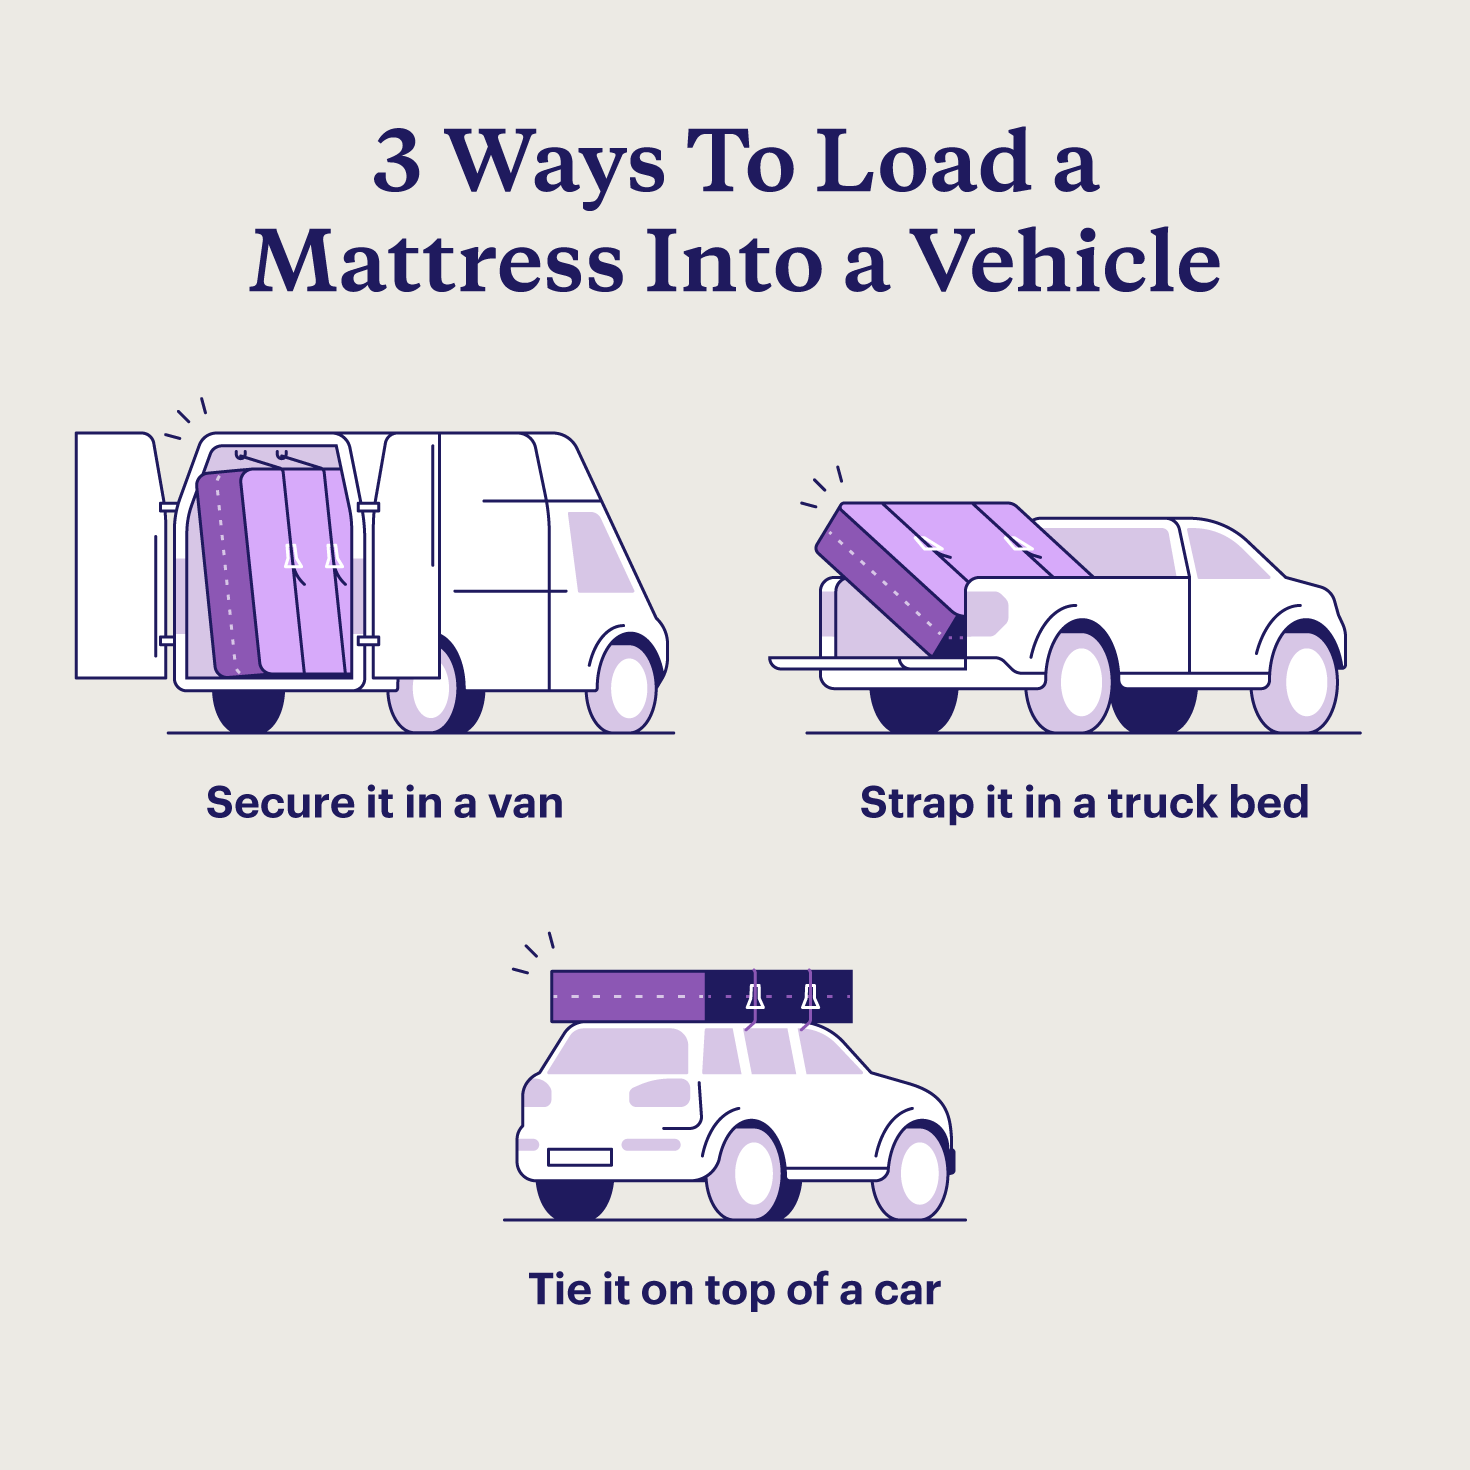 Three ways to load a mattress in a vehicle, including securing it in a moving van, strapping it in a truck bed, and tying it on 